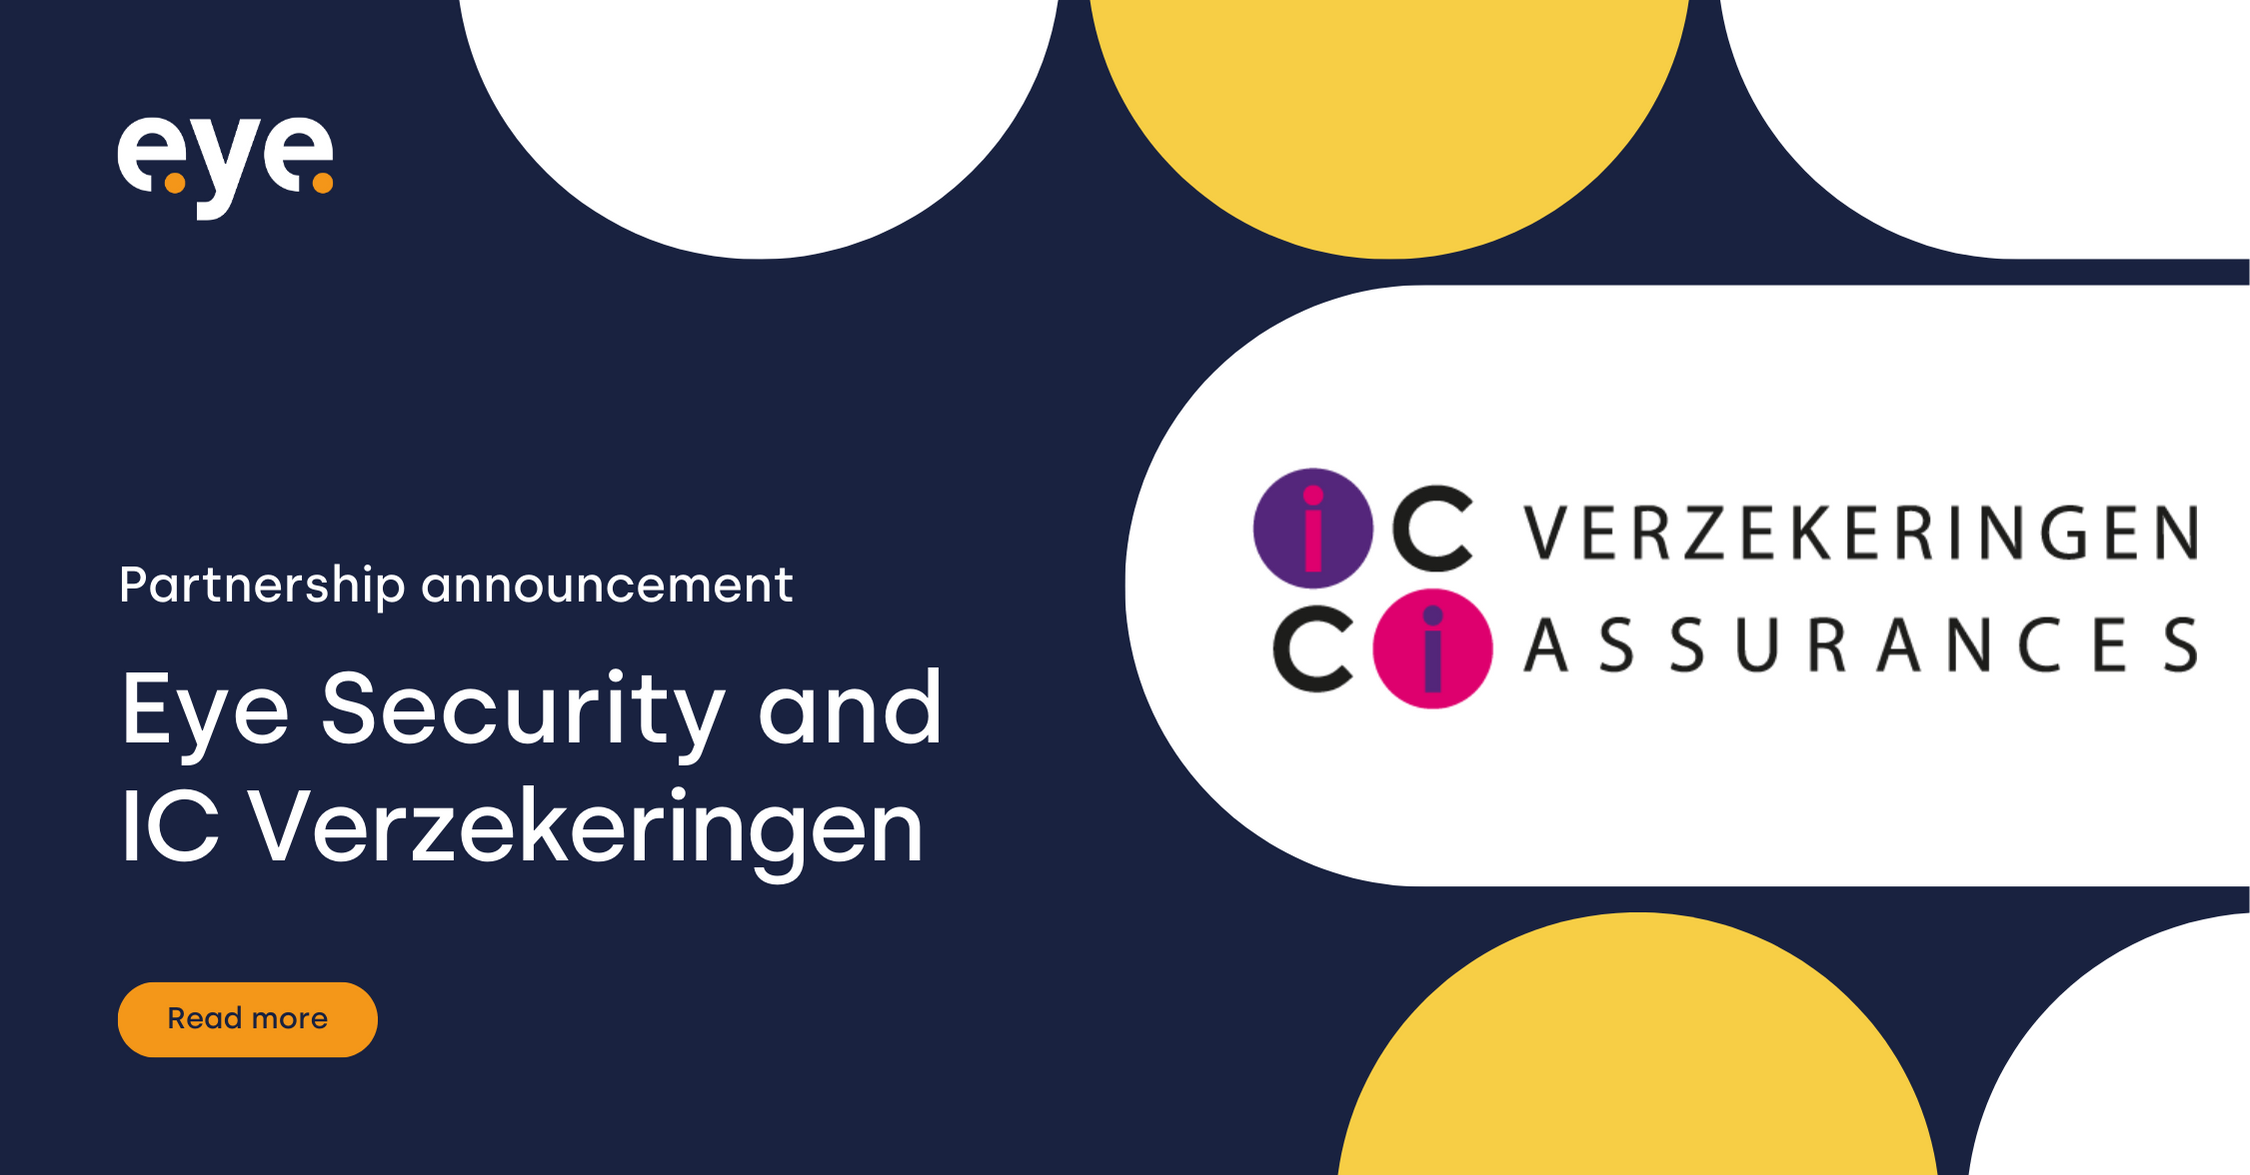 IC Verzekeringen / CI Assurances and Eye Security are joining forces to strengthen cybersecurity for social enterprises